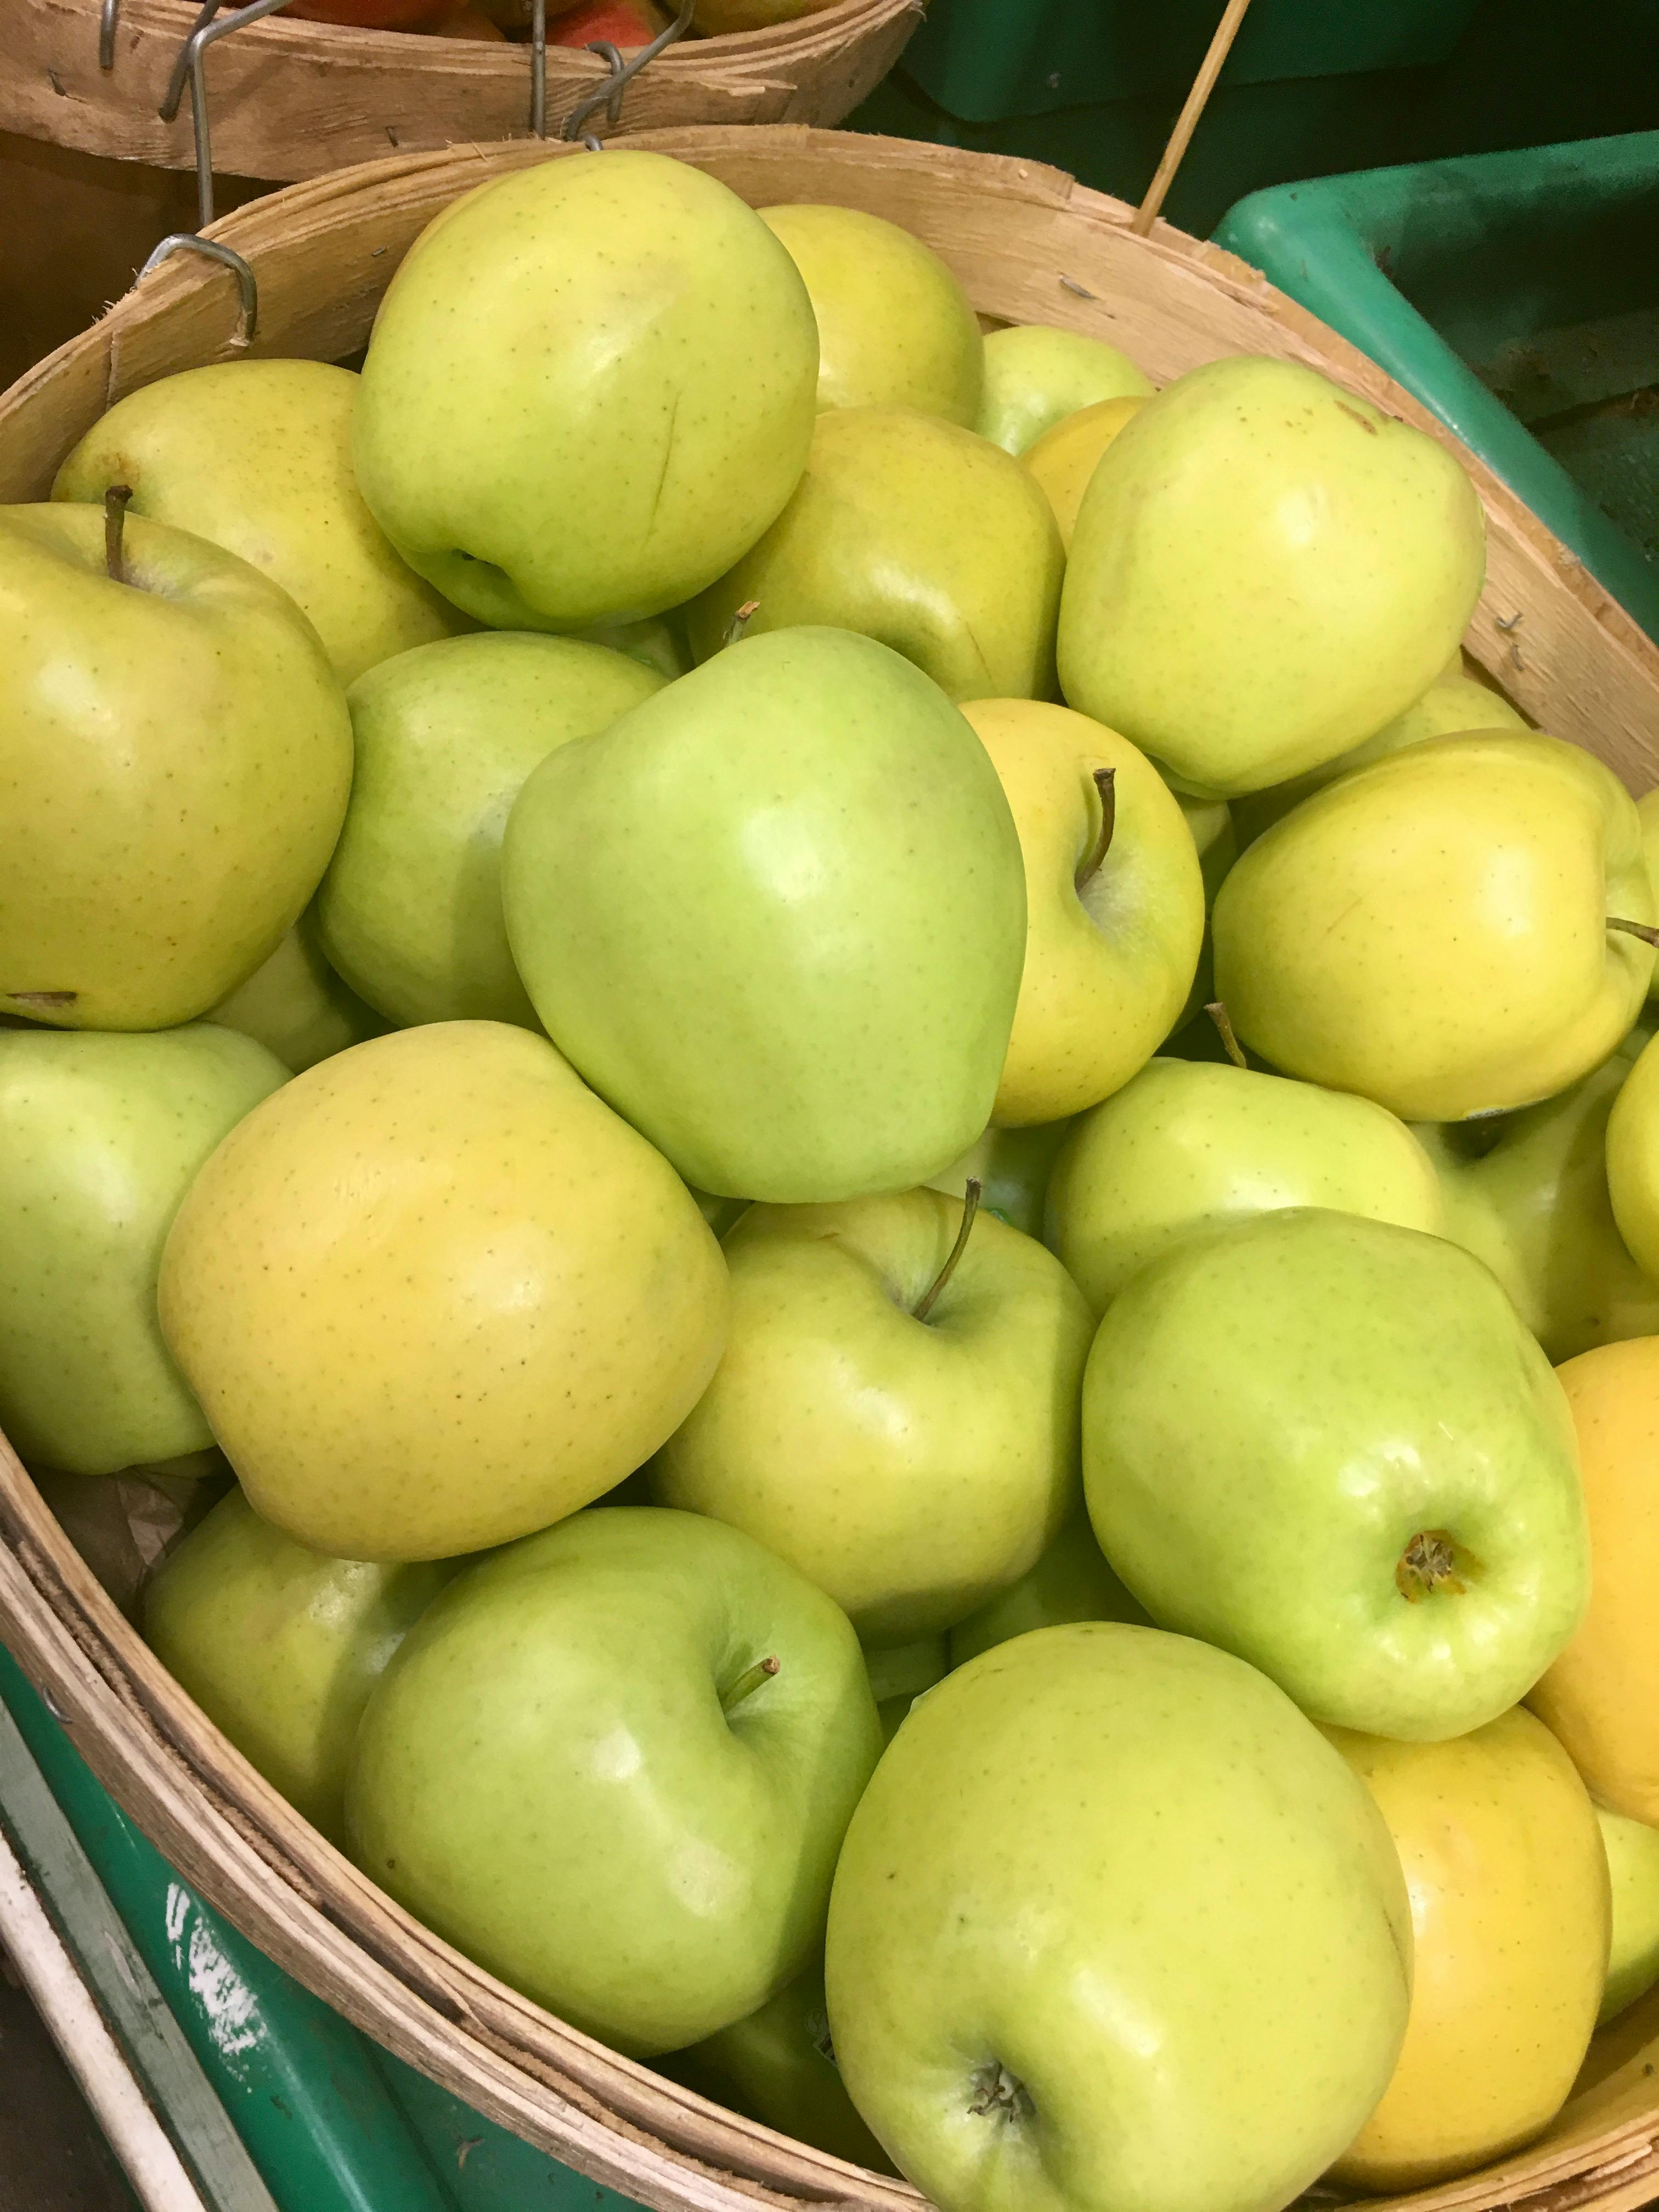 Free stock photo of apples, basket, yellow apples